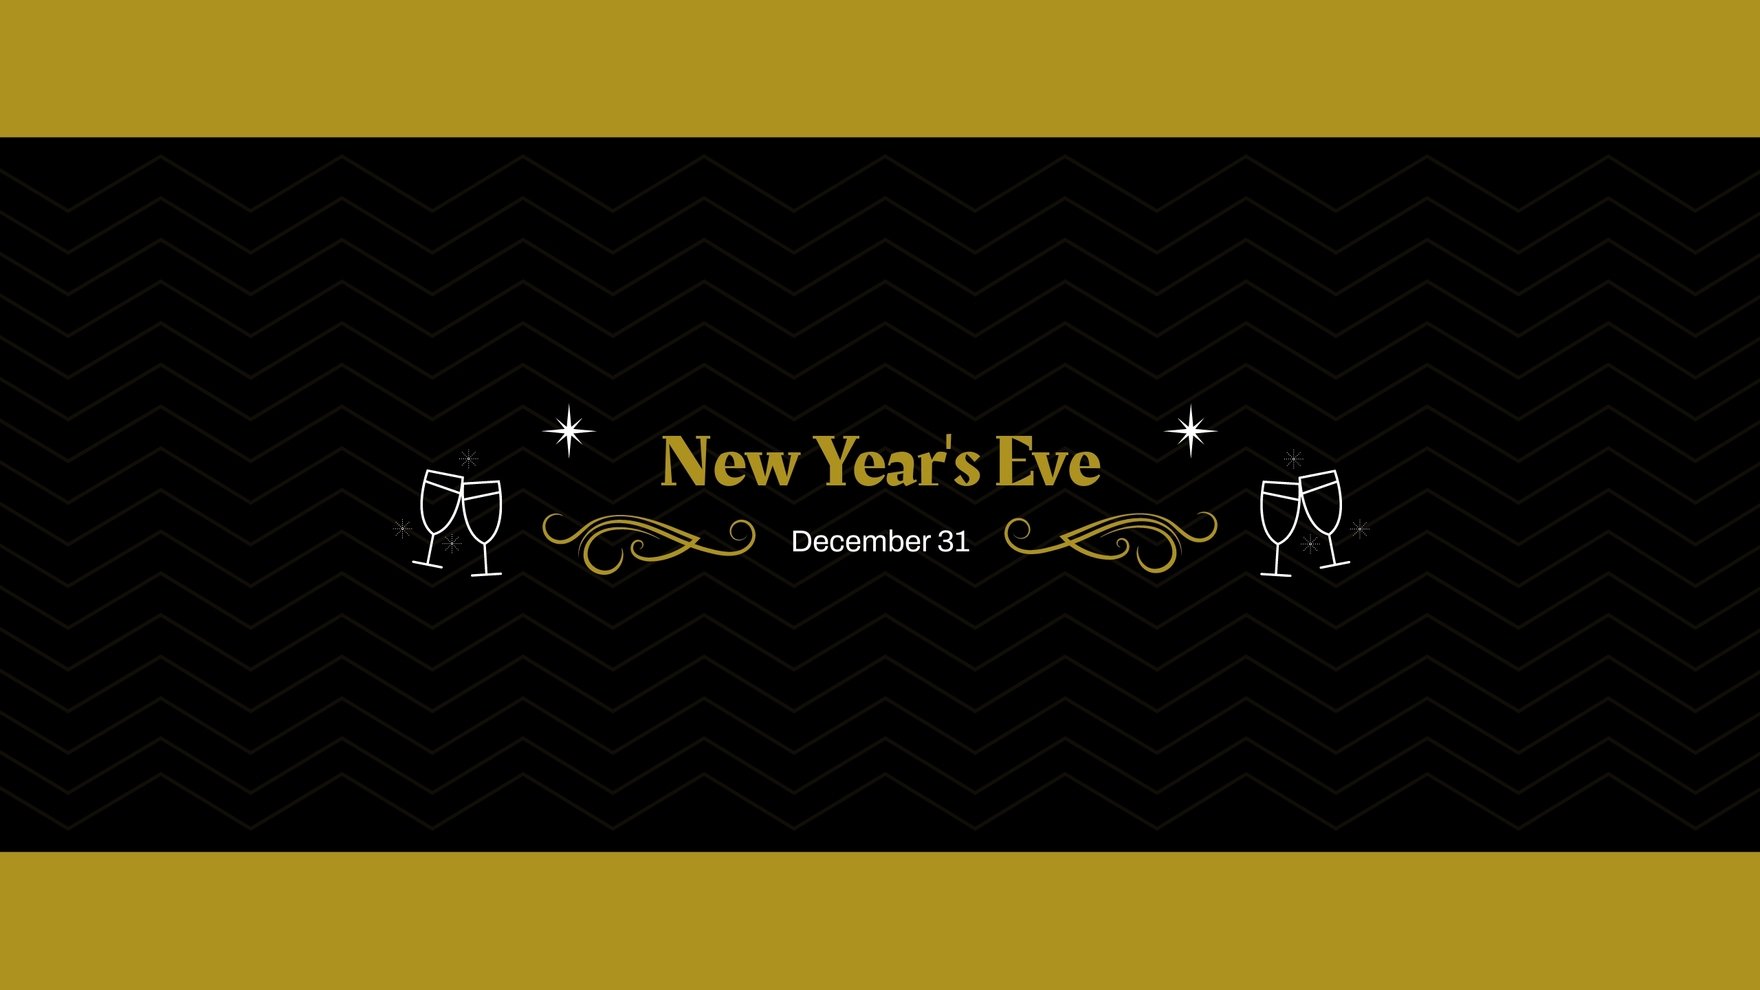 New Year's Eve Youtube Banner Template